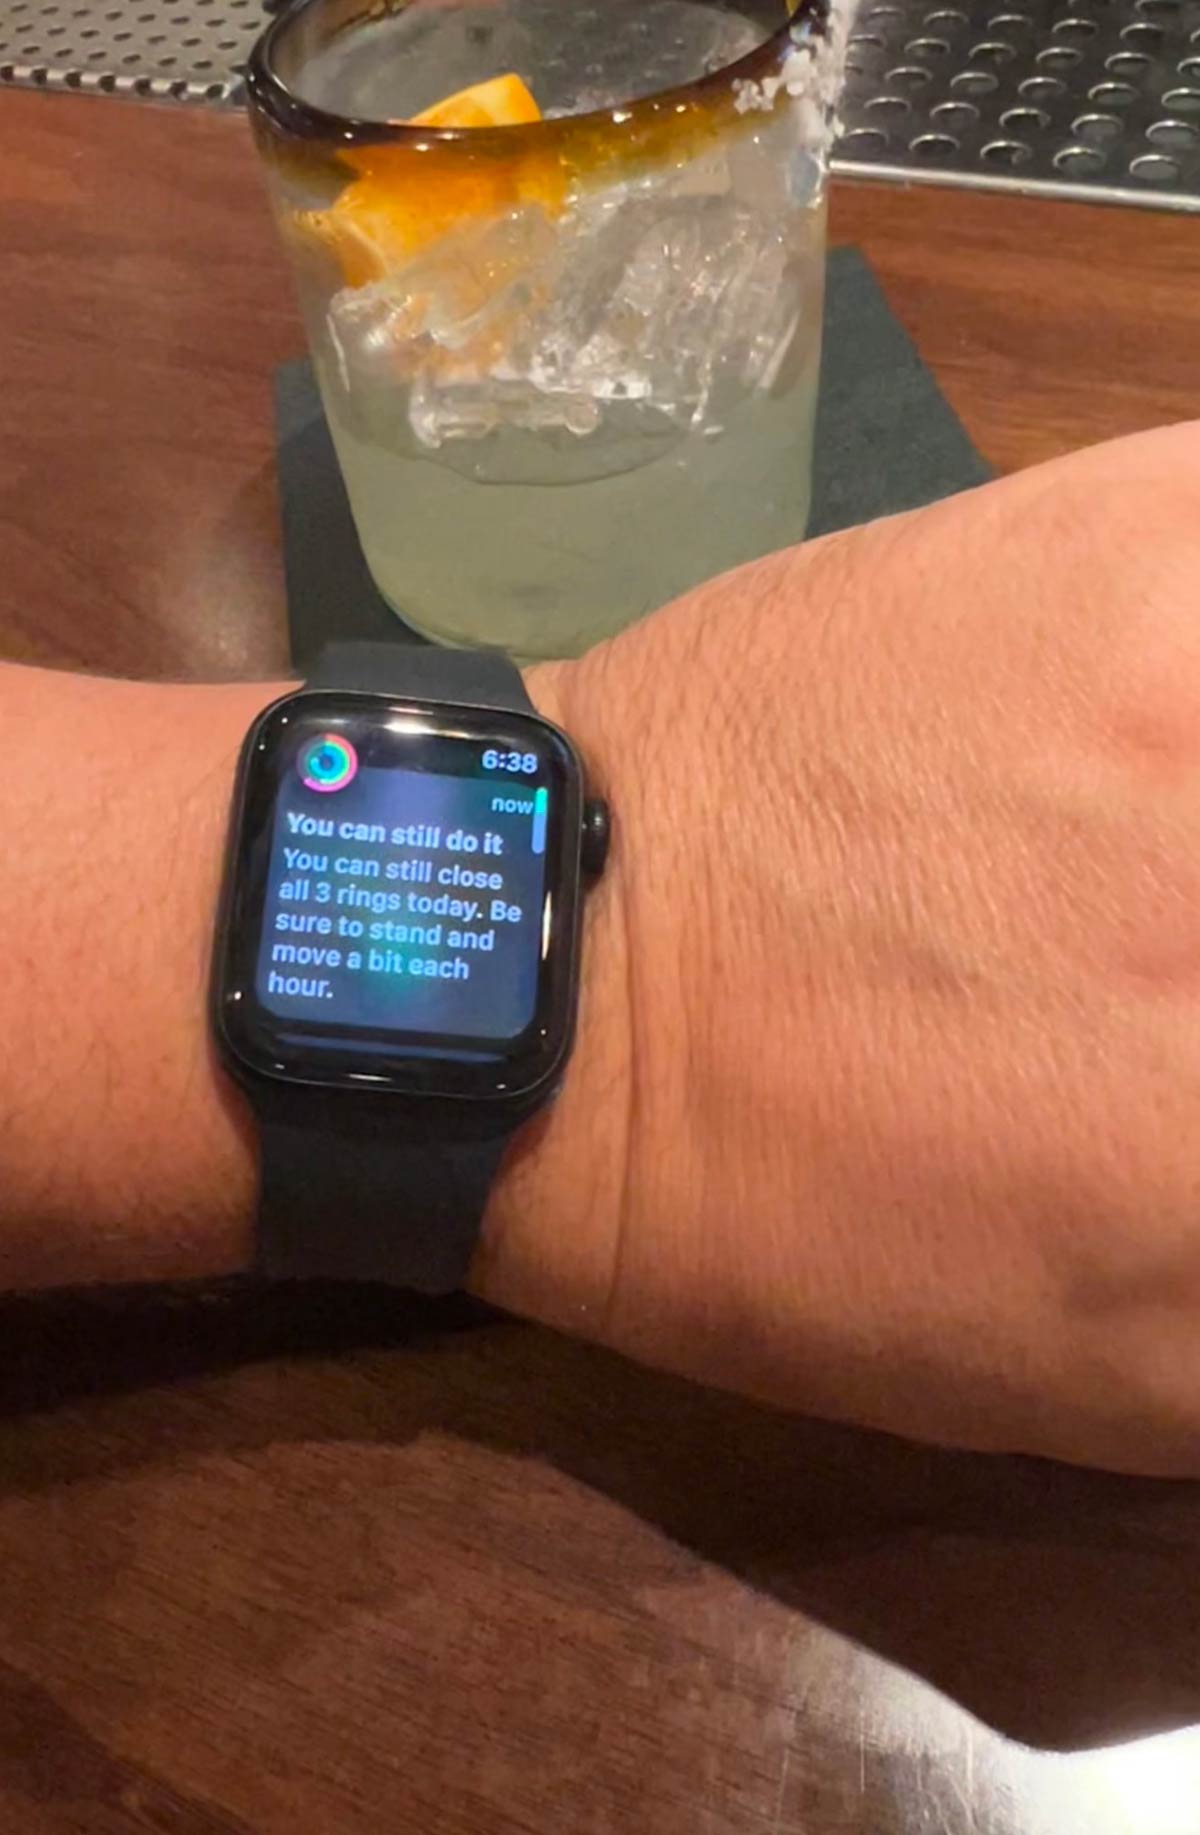 I love your optimism, Apple Watch